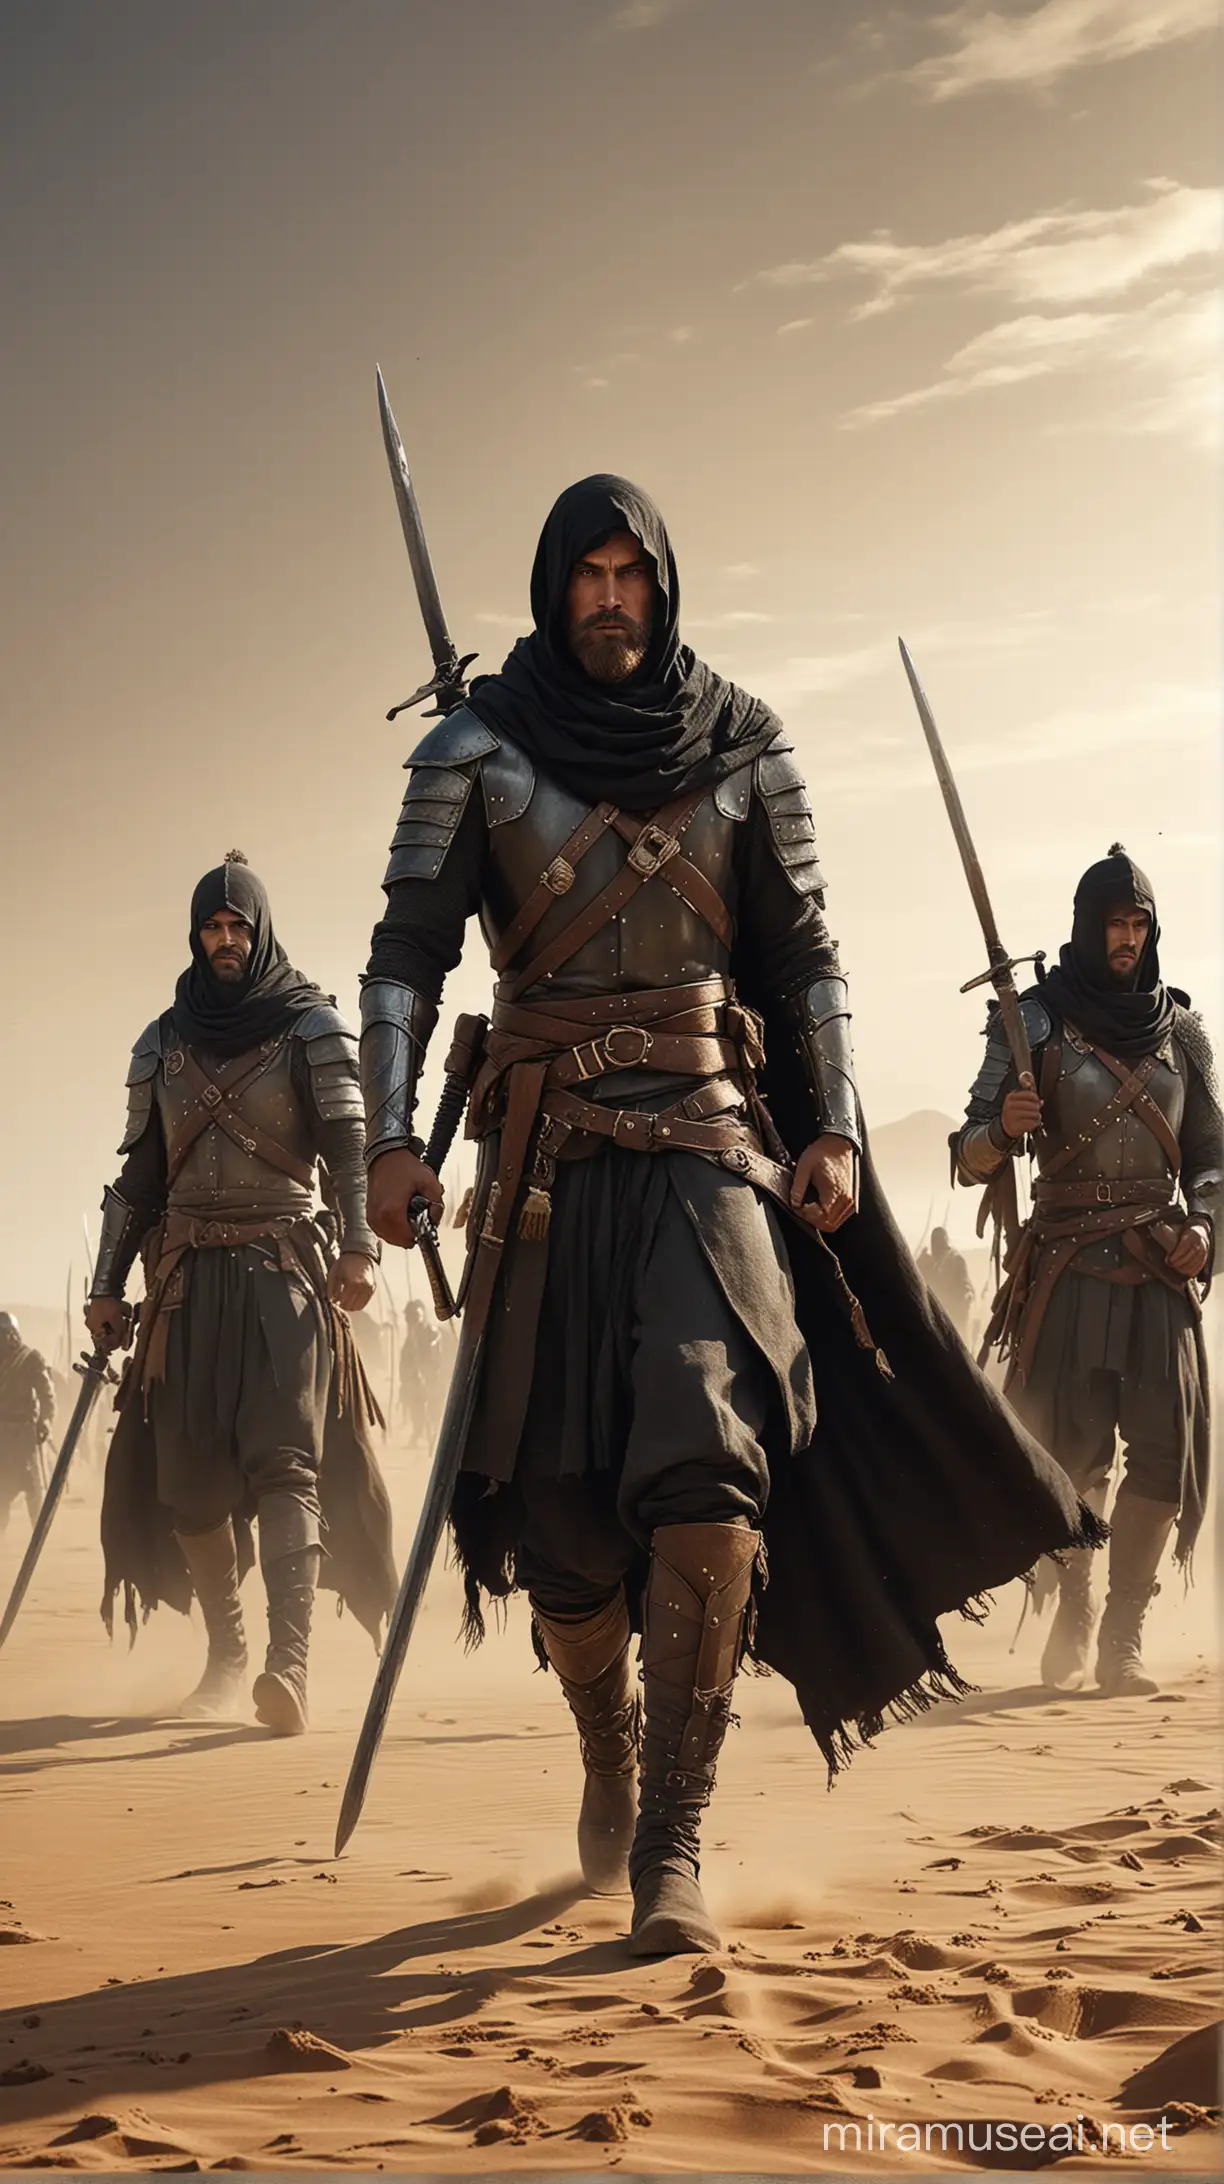 Medieval Warriors with Swords on Desert Sand Digital Painting with Atmospheric Realism